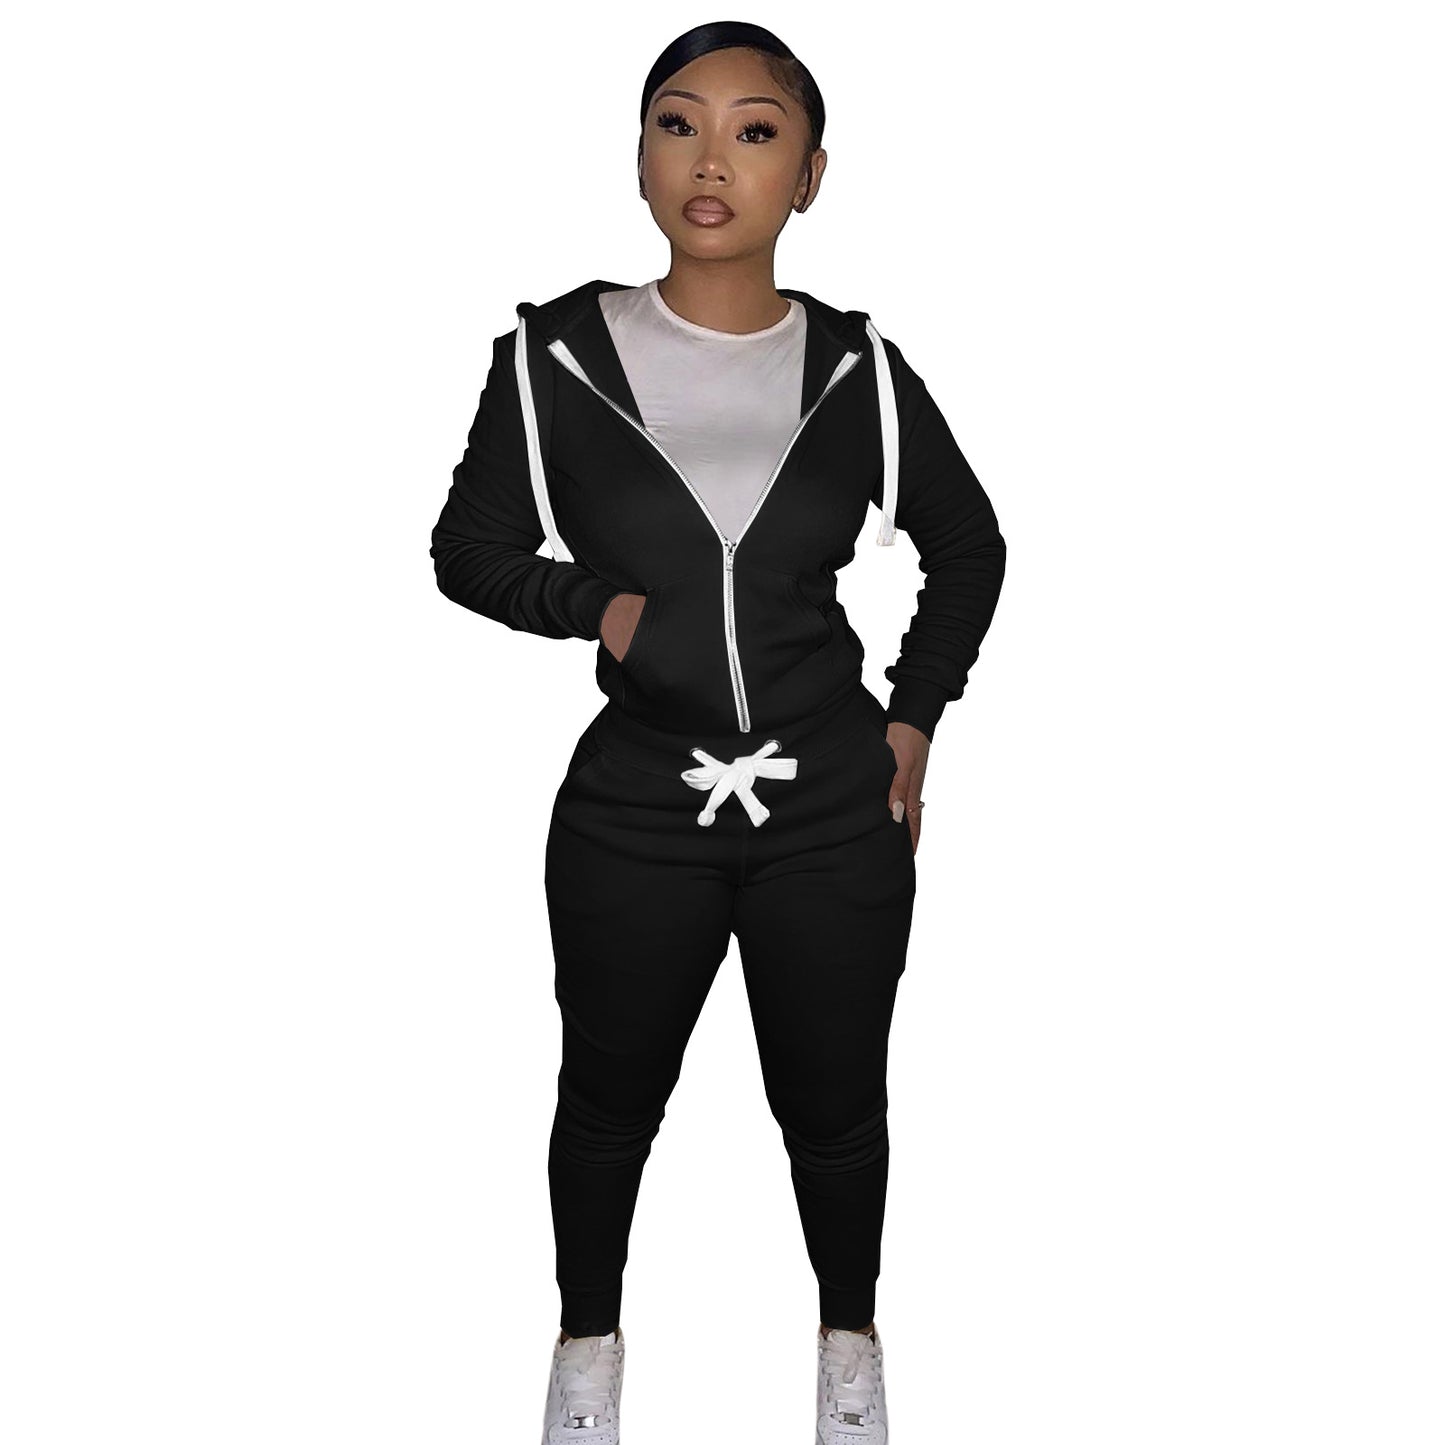 2-Piece Cotton Hooded Track Suit For Women